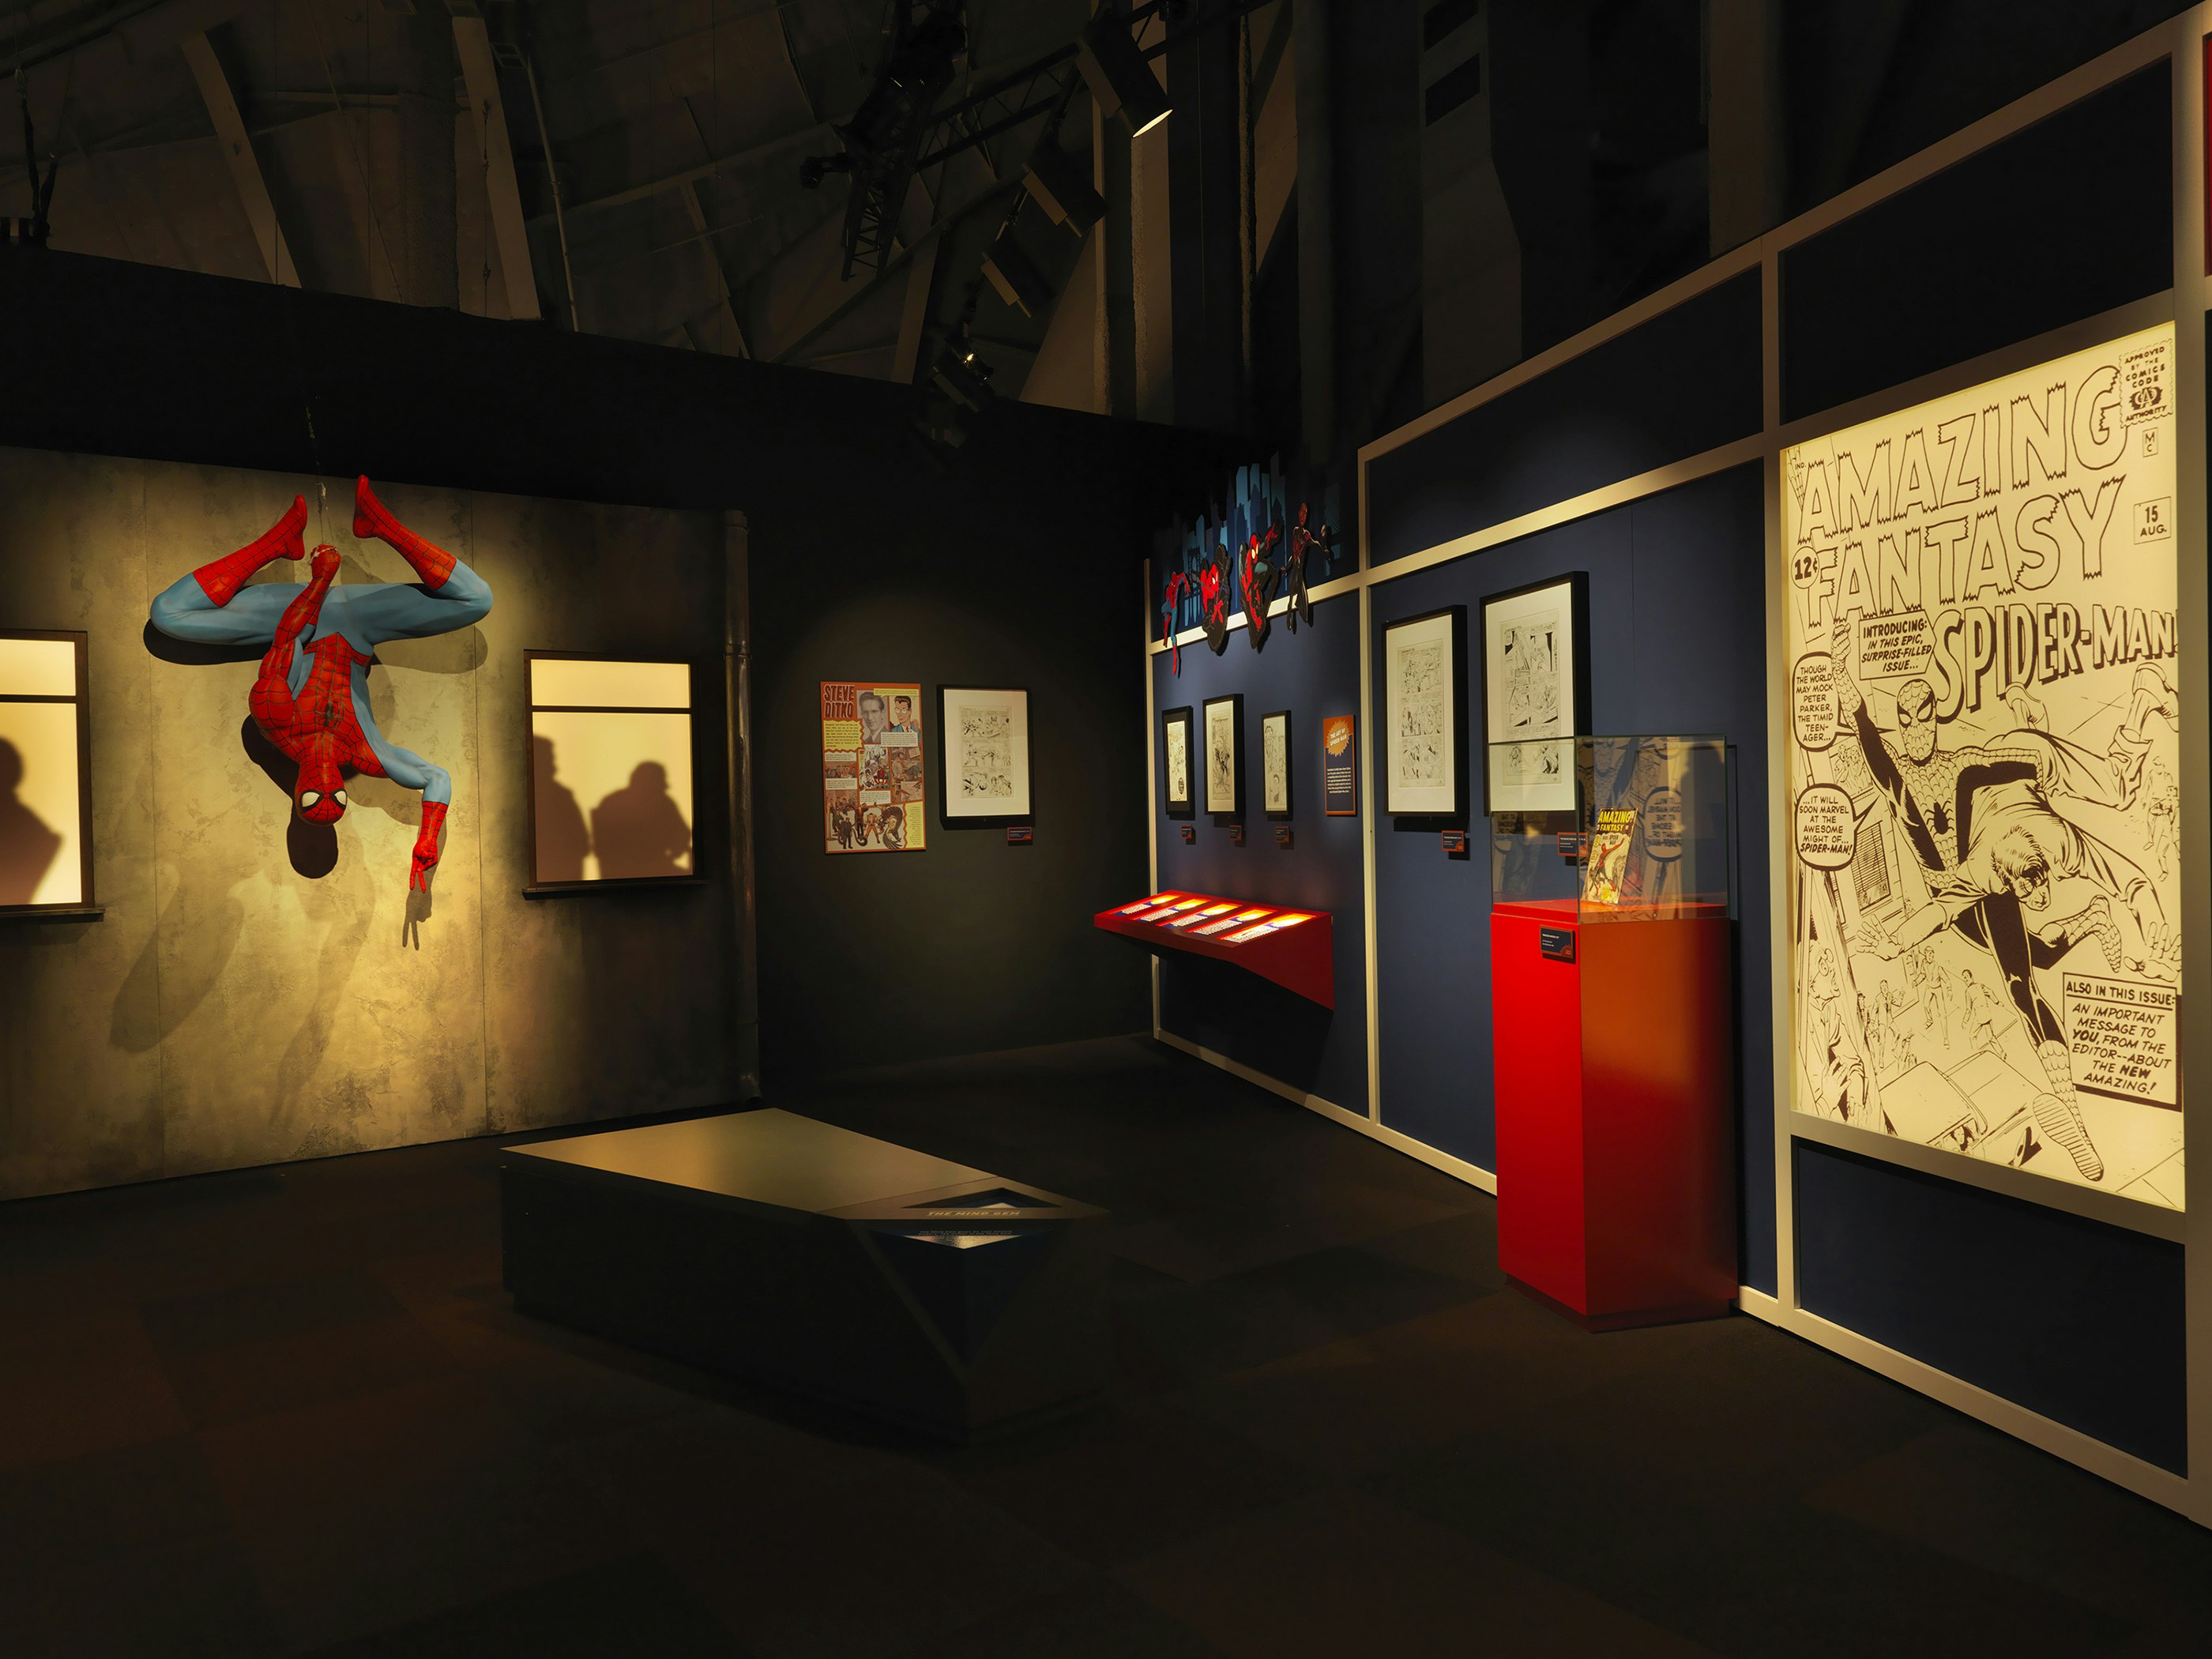 Spiderman props at a Marvel exhibition